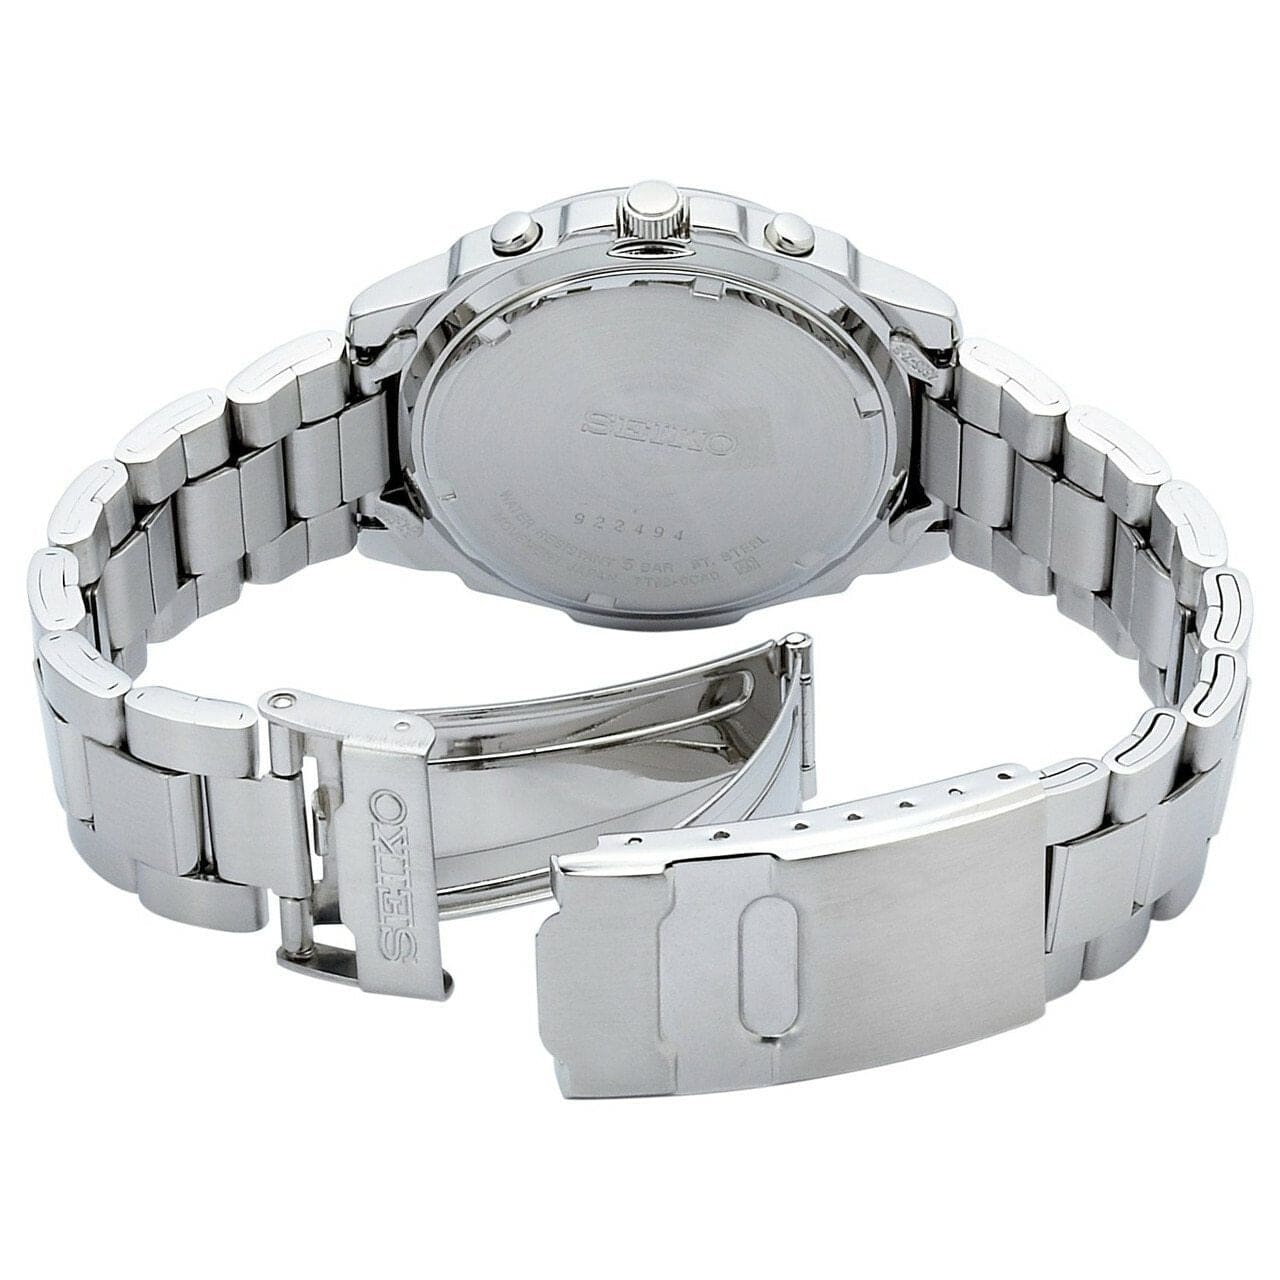 Seiko SNDB33 Stainless Steel Silver Dial Men's Chronograph Watch 4954628113962